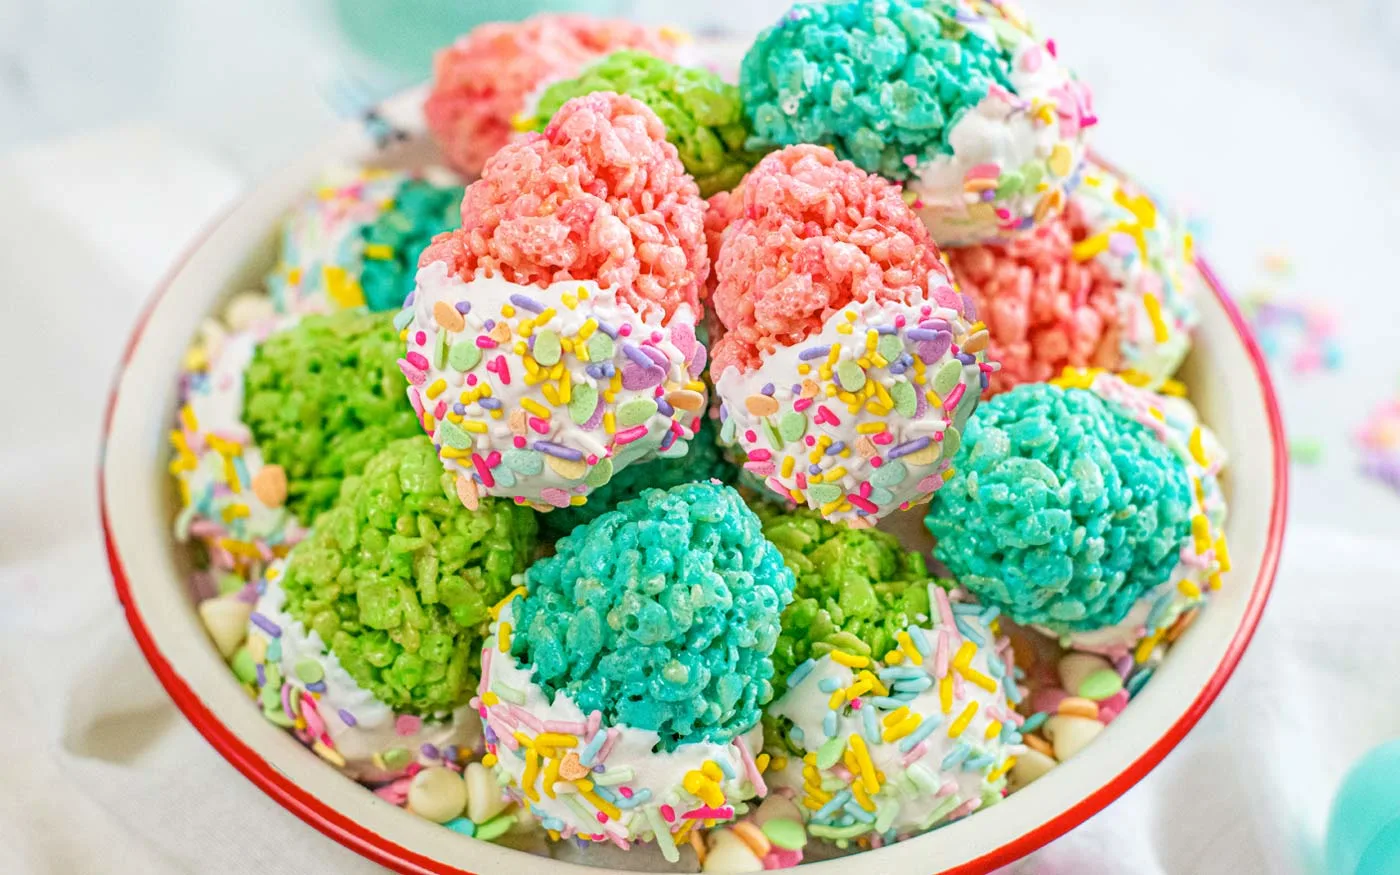 Bowl of easter egg rice krispie treats with bottom half of egg dipped in white chocolate and decorated with Easter sprinkles.